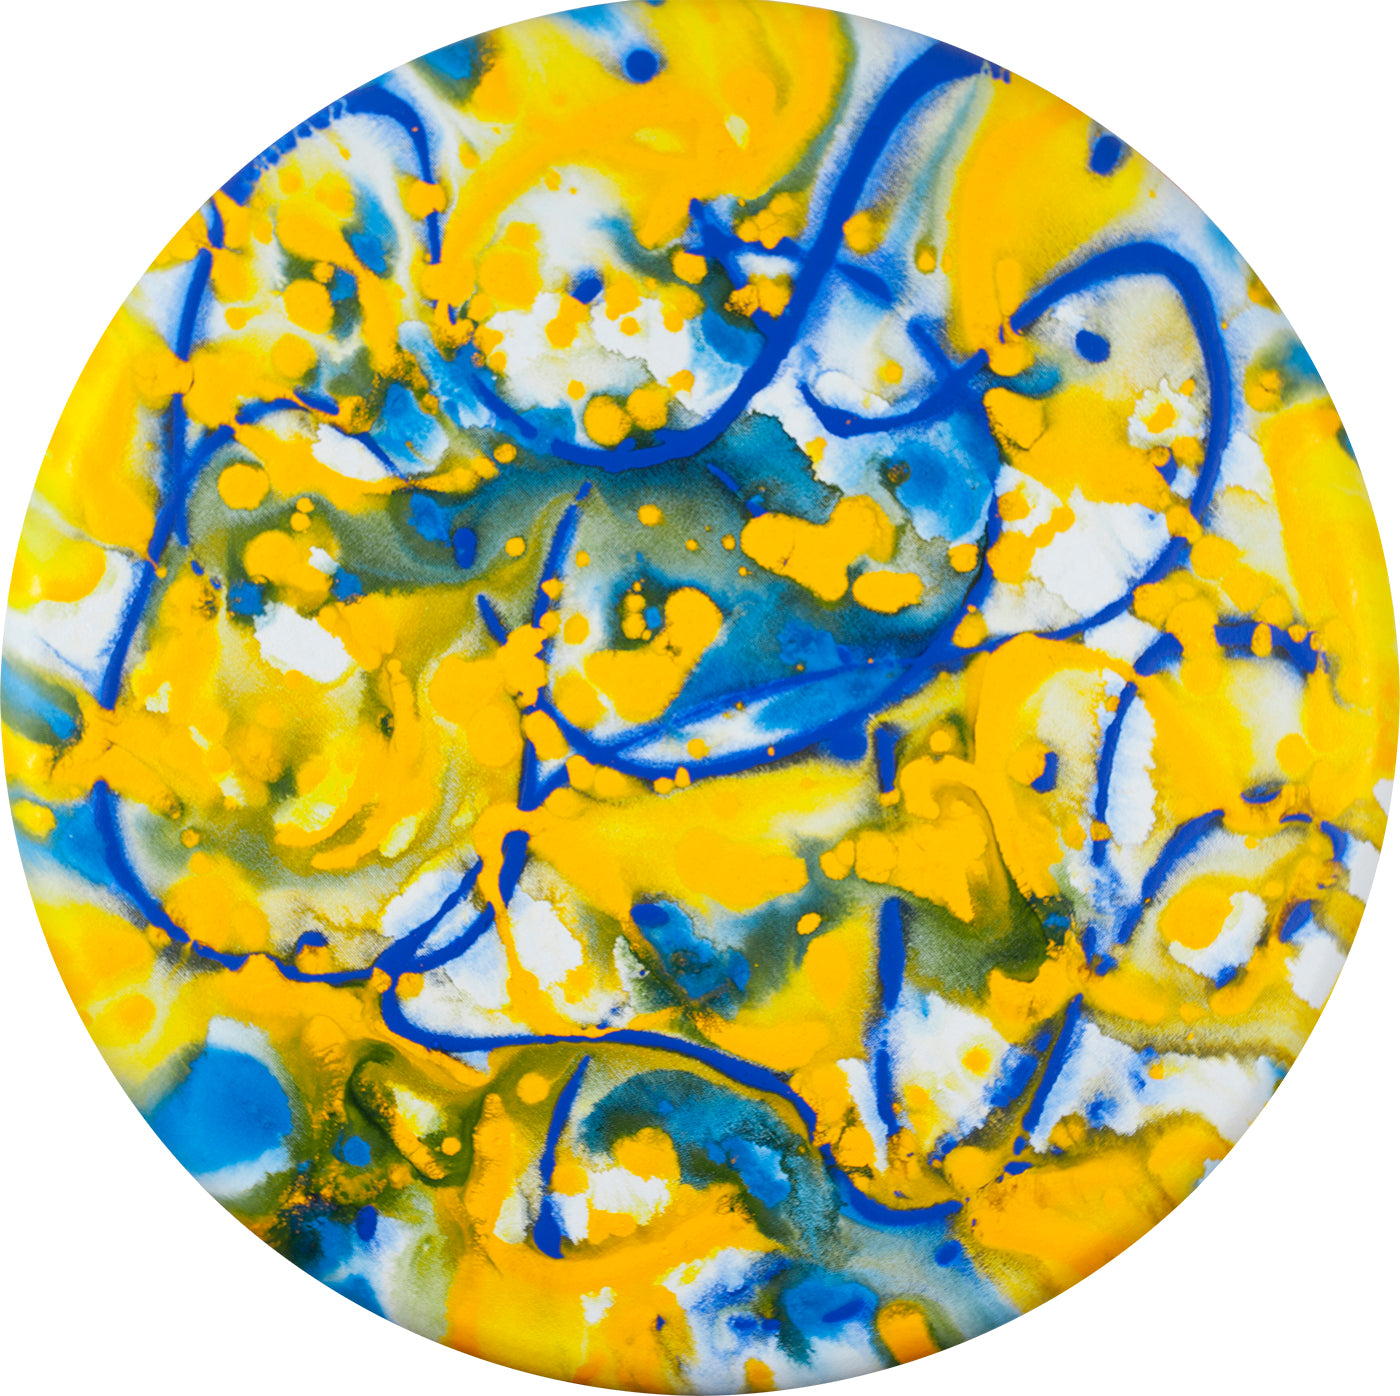 On view at the Long Island Museum. ©2022 Alicia R Peterson, *We Are One*. Acrylic on 24-inch diameter convex canvas. Photographer: Peter Scheer. $3,500